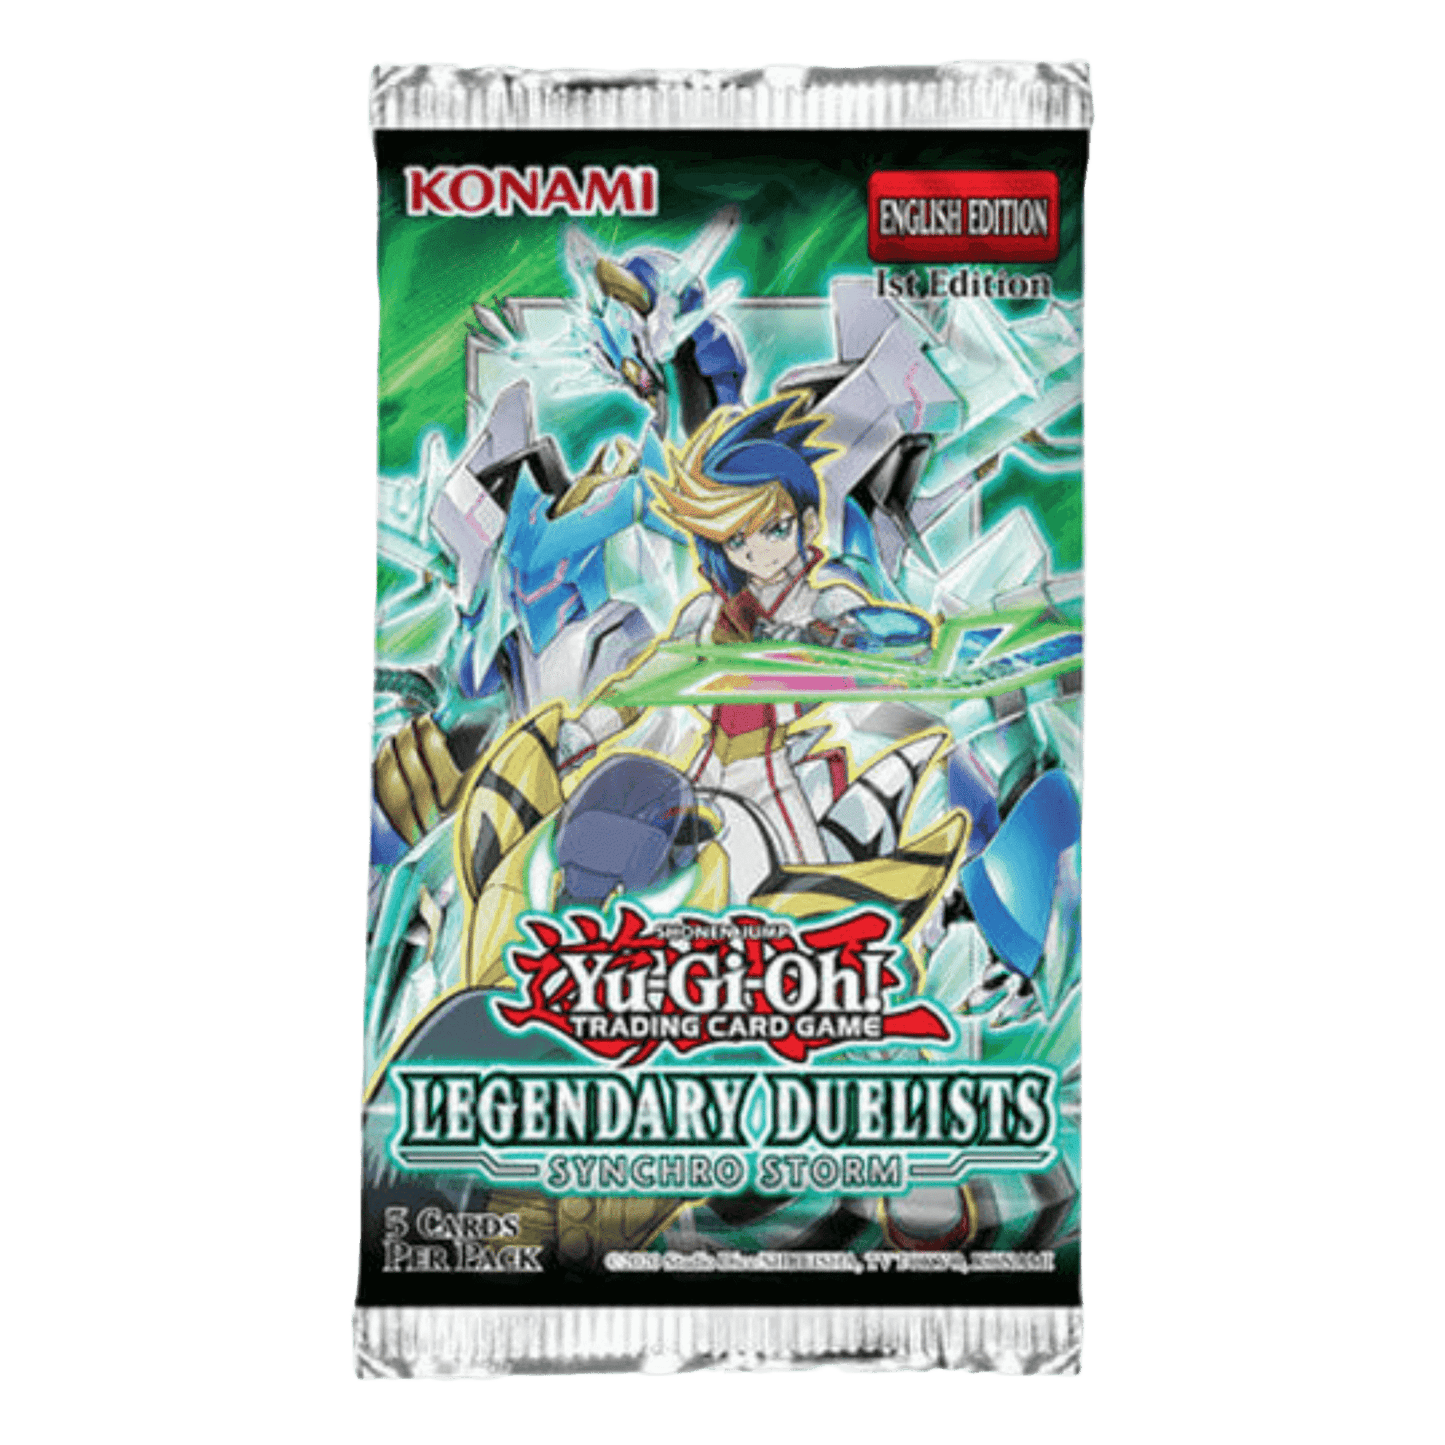 Yu-Gi-Oh! Legendary Duelists Synchro Storm Booster Pack (5 Cards)